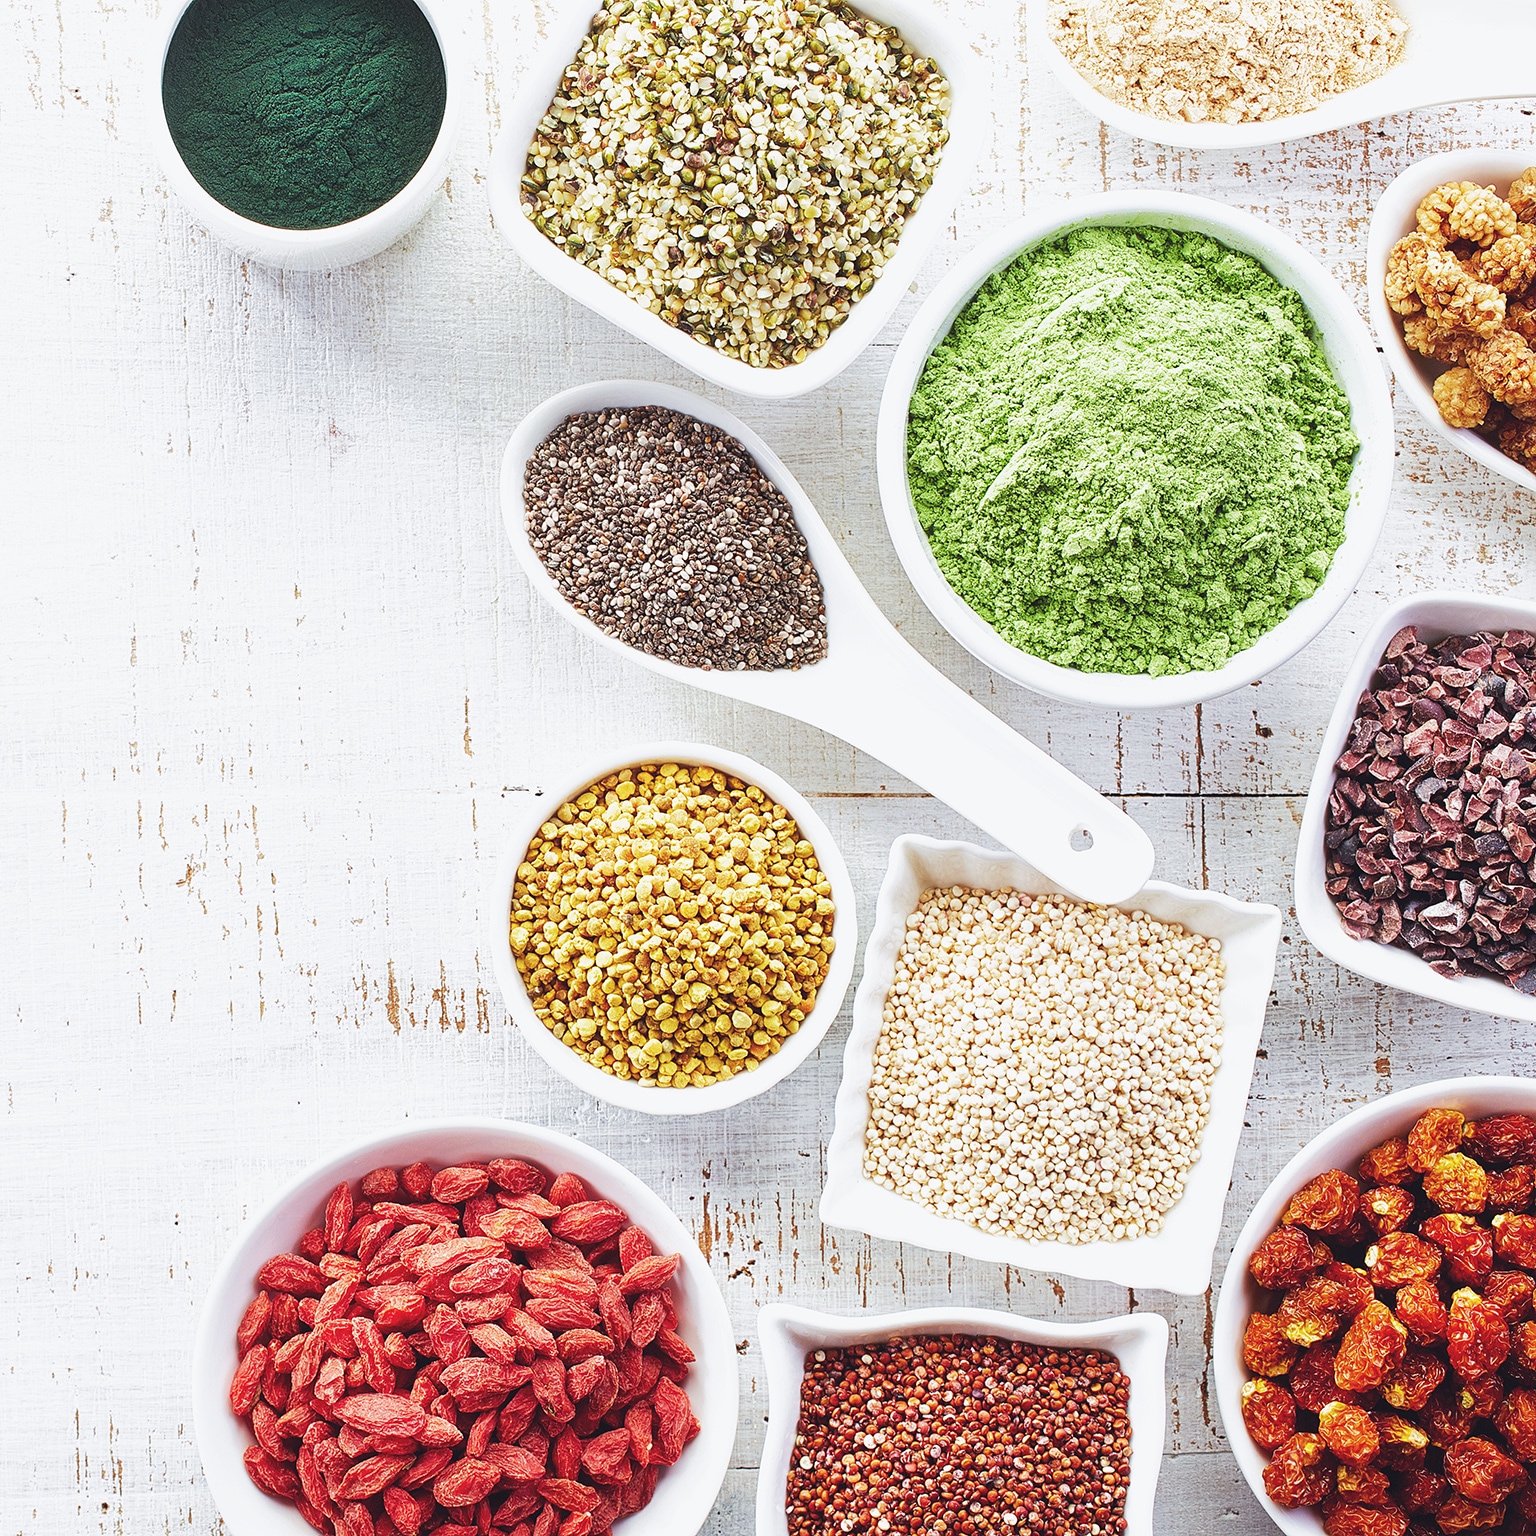 The market for alternative protein: Pea protein, cultured meat, and more